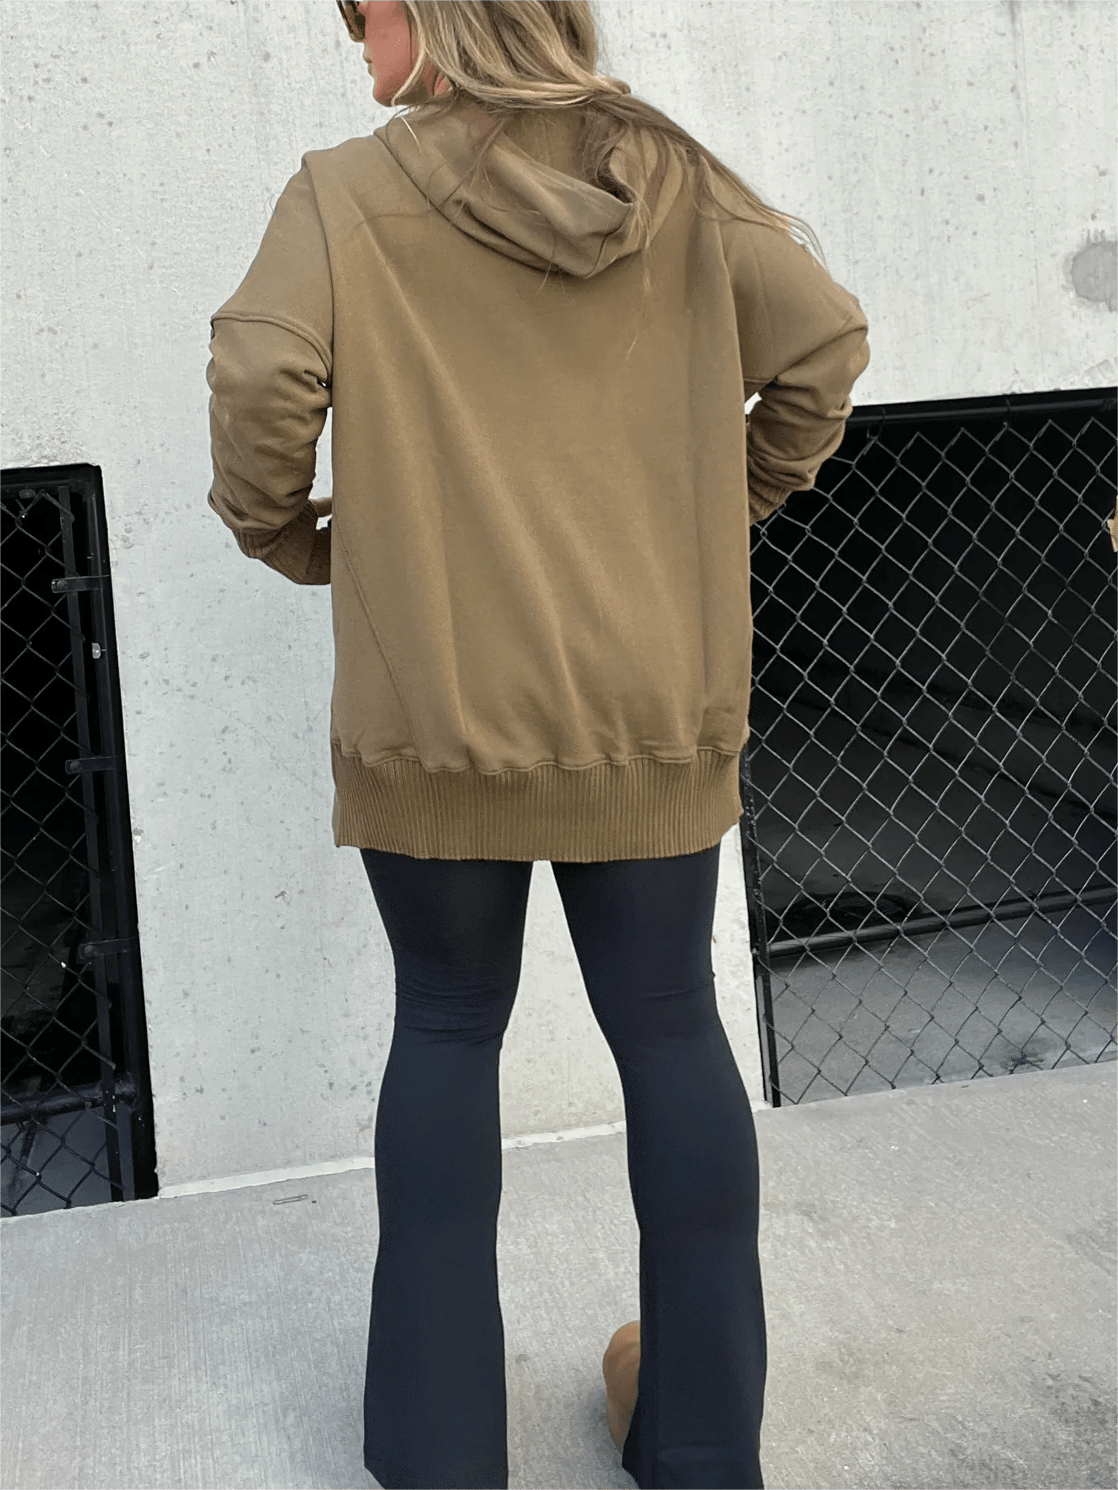 Women's Oversized Hoodie With Thumb Holes (Free Shipping) - dressowy